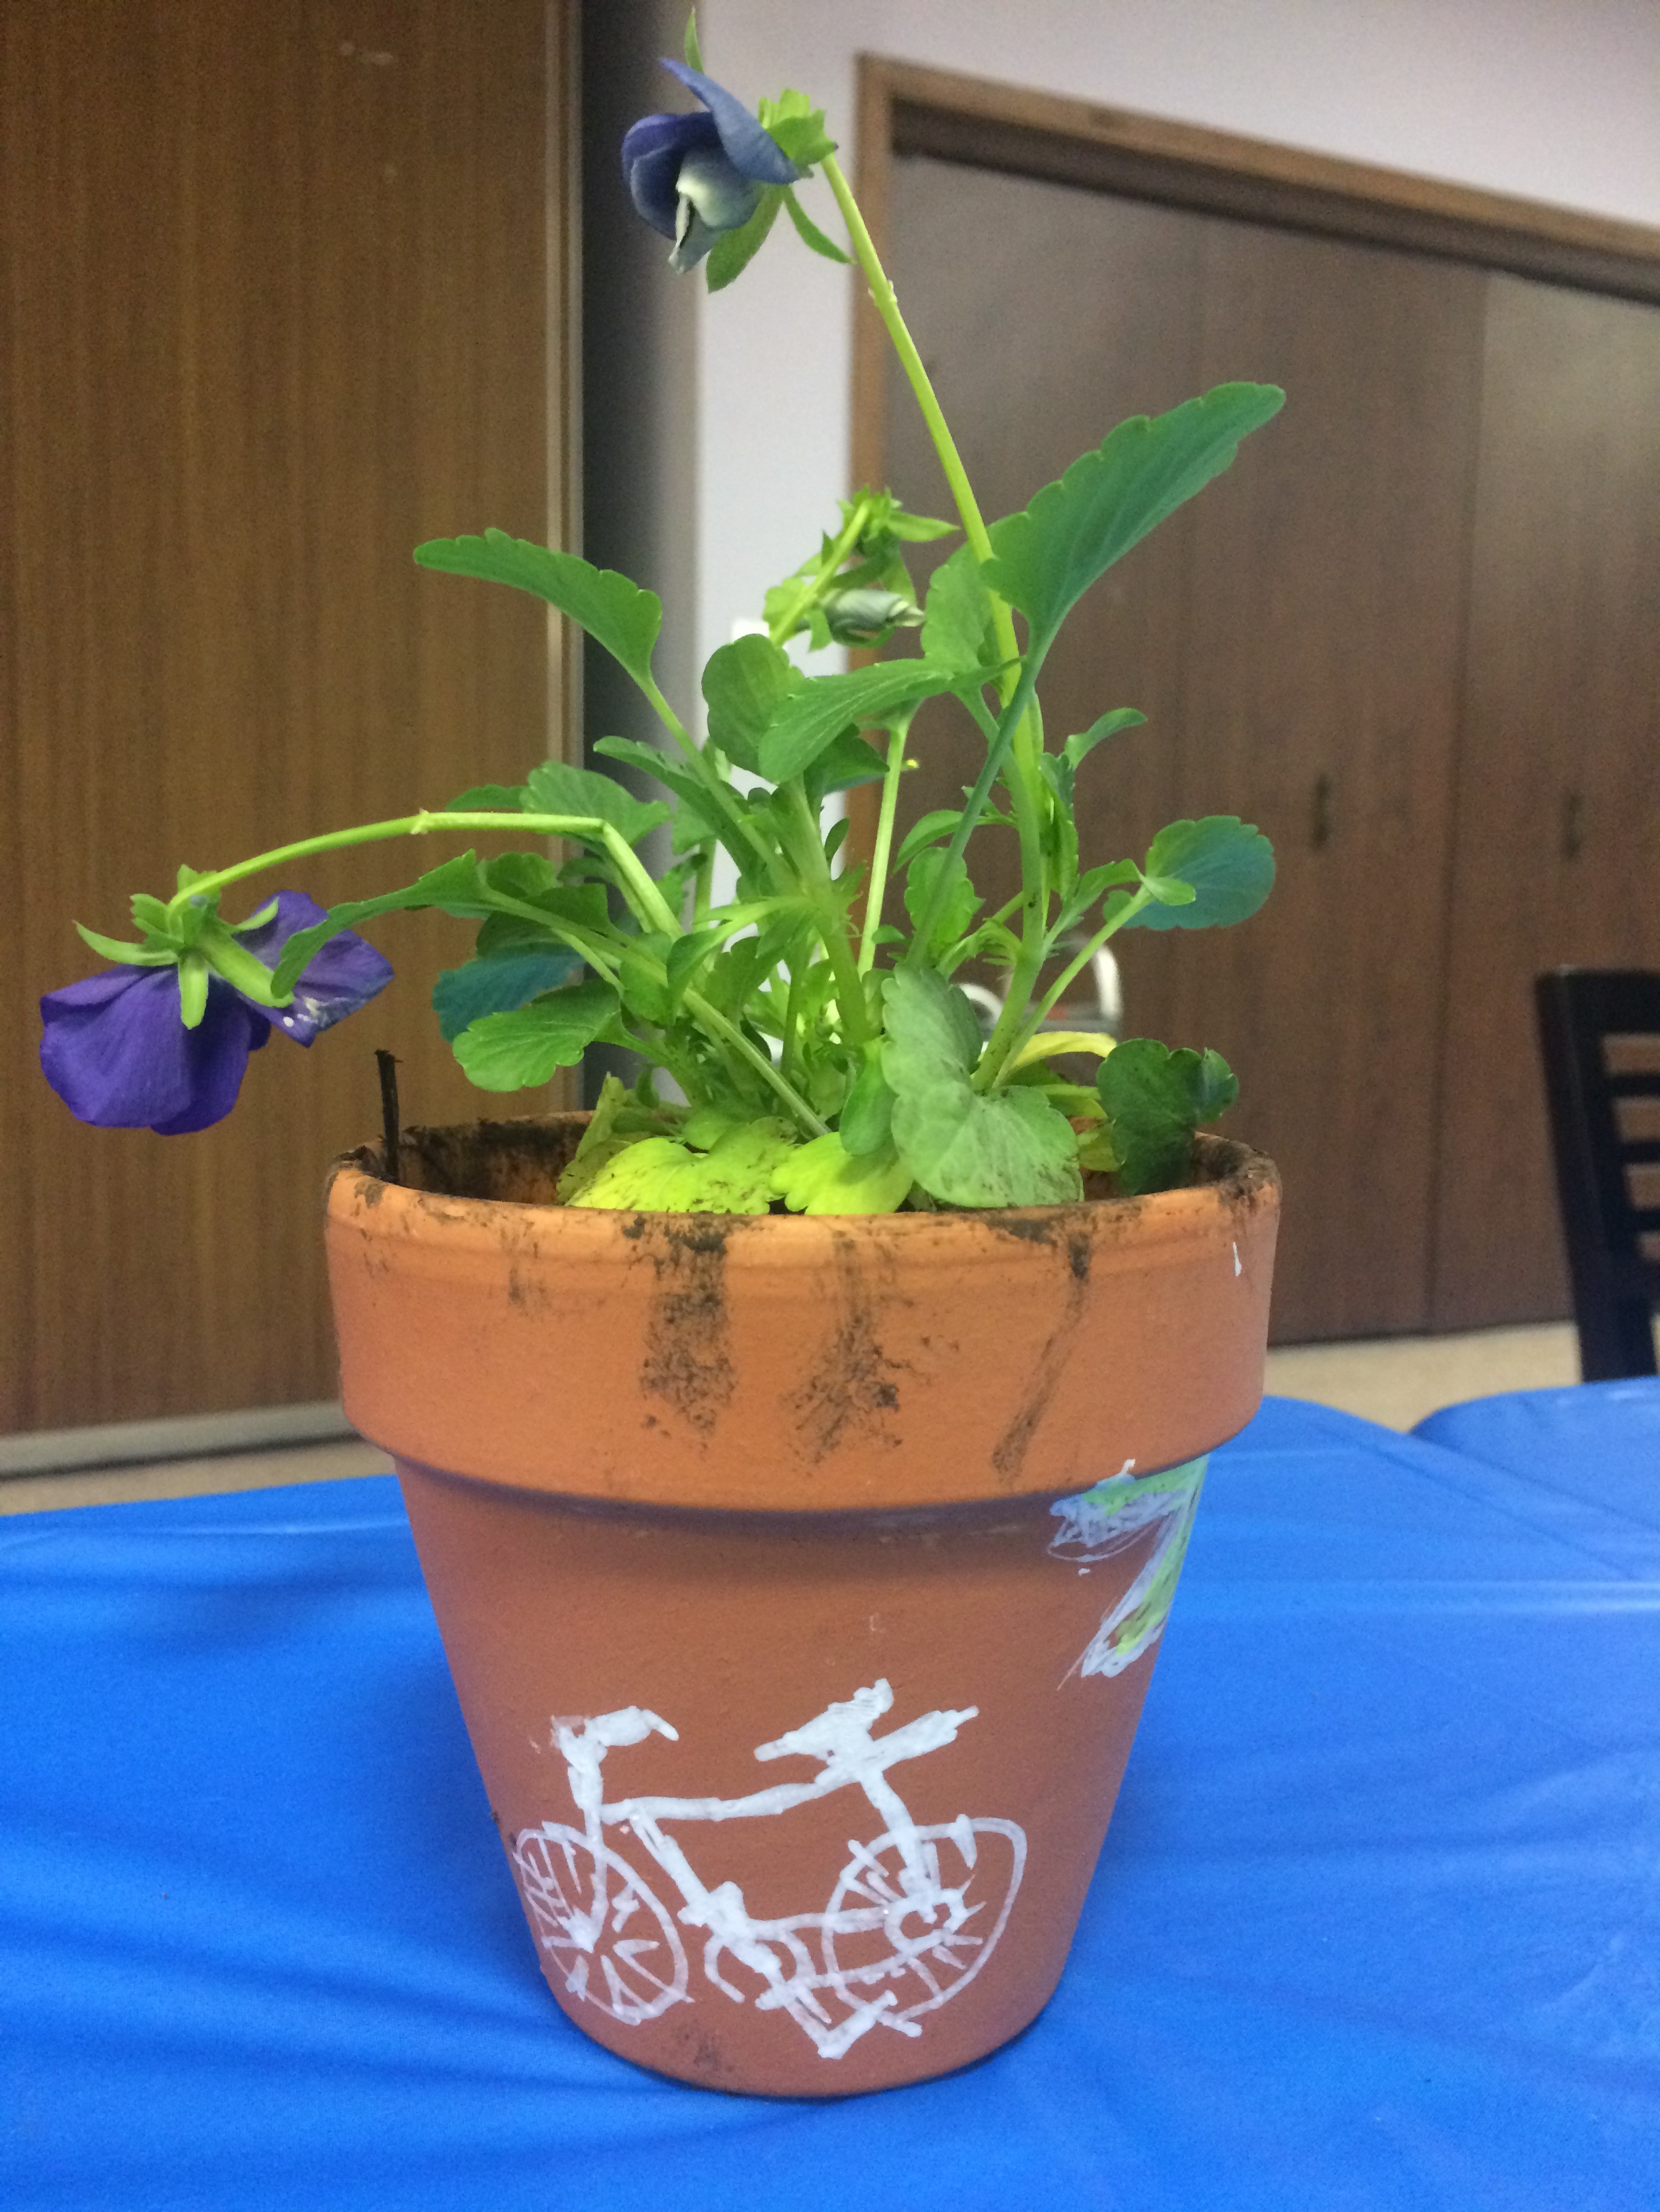 Retirement Research Foundation with JASC - Elders preparing for Spring by decorating pots and planting flowers as a way to talk about what they are looking forward to as the weather warms.